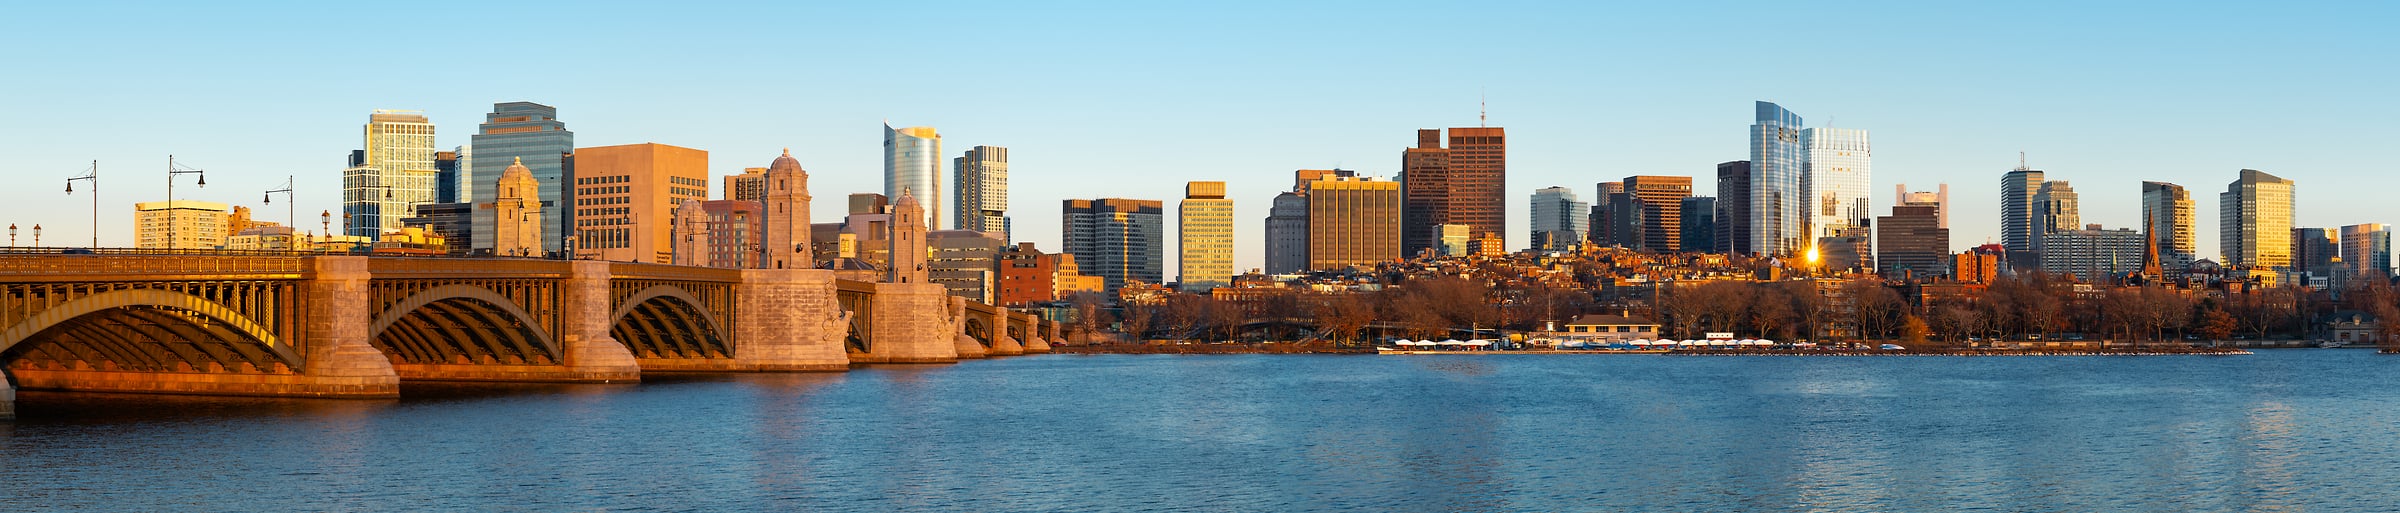 348 megapixels! A very high resolution, large-format VAST photo print of the Boston skyline; wide panorama photograph created by Greg Probst in Boston, Massachusetts.